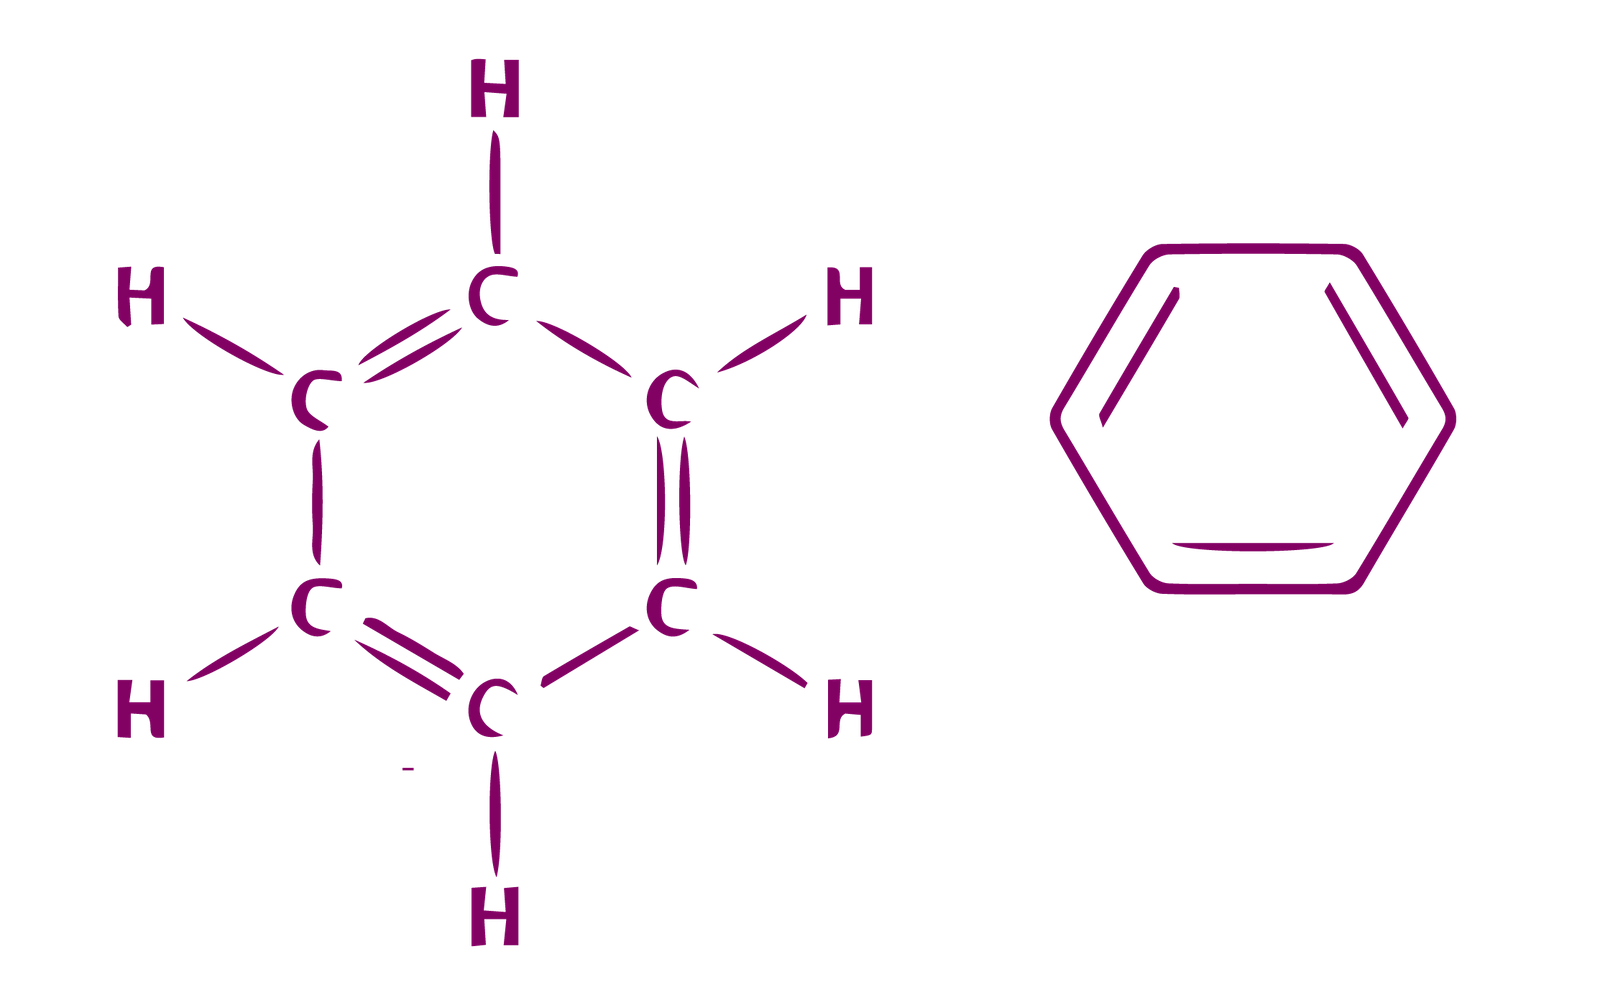 Two sketches of the chemical structure of a benzene ring. The structure on the right is a shorthand version that does not illustrate the position of carbon and hydrogen atoms.